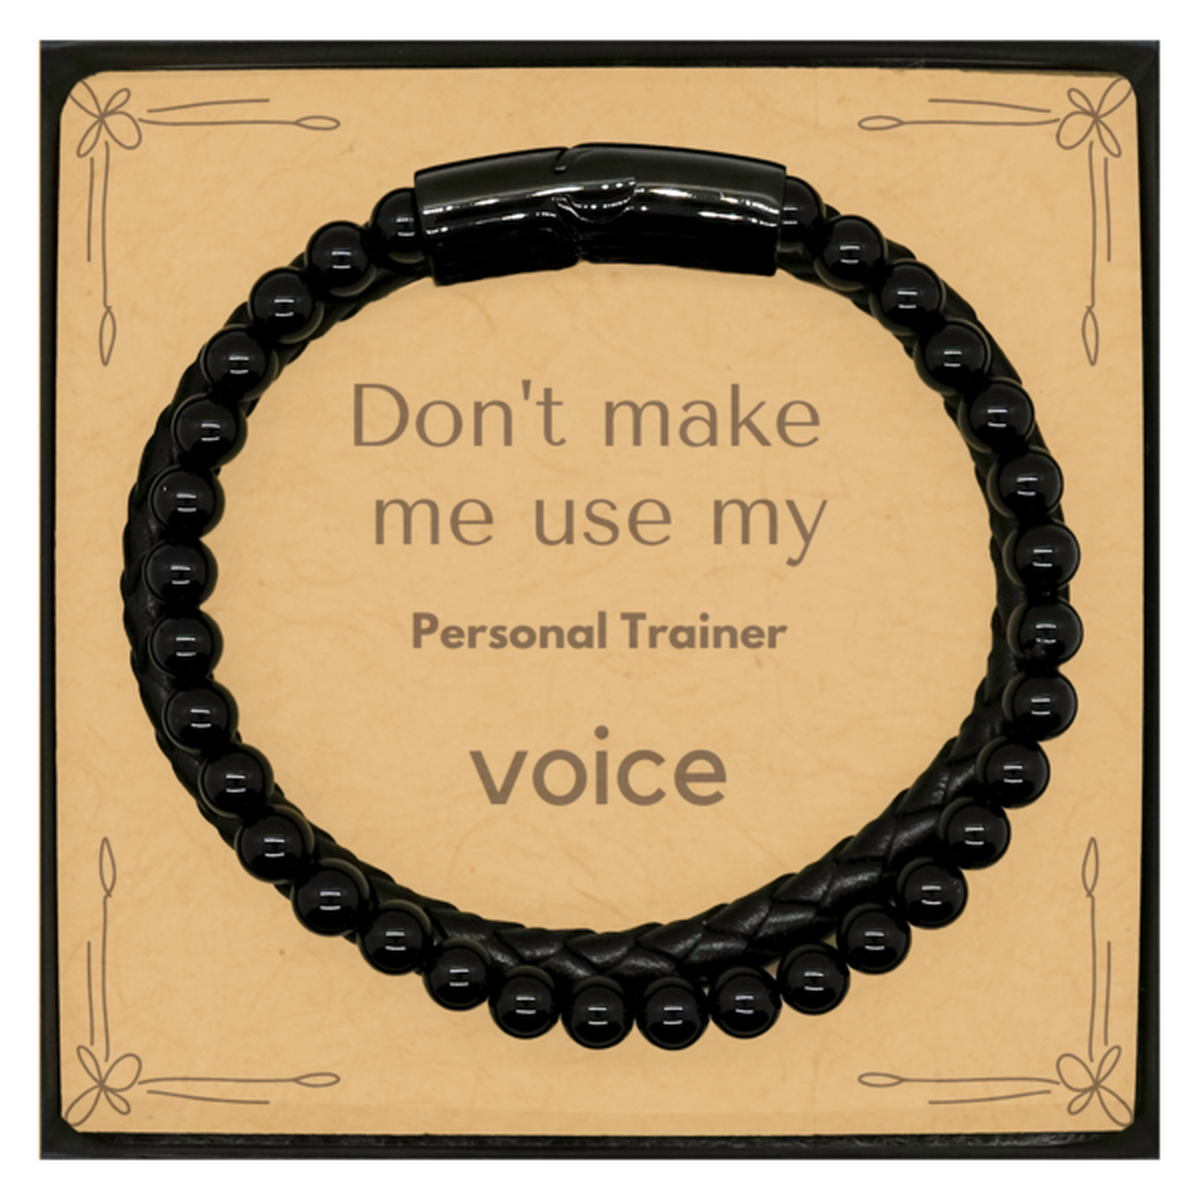 Don't make me use my Personal Trainer voice, Sarcasm Personal Trainer Card Gifts, Christmas Personal Trainer Stone Leather Bracelets Birthday Unique Gifts For Personal Trainer Coworkers, Men, Women, Colleague, Friends